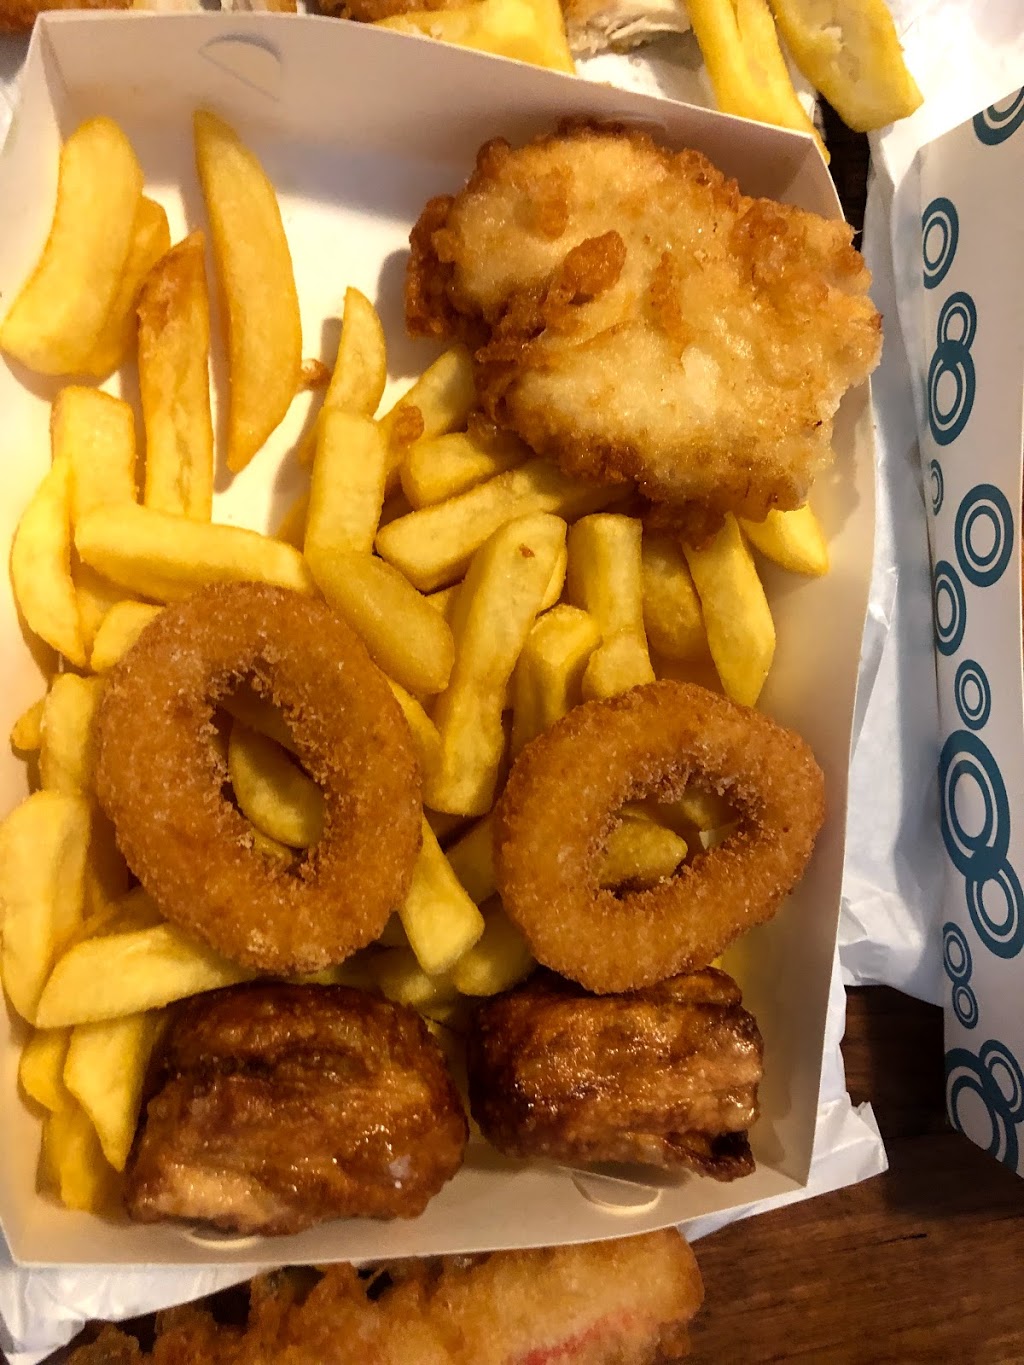 North Ringwood Fish and Chips | meal takeaway | 186 Warrandyte Rd, Ringwood North VIC 3134, Australia | 0398762945 OR +61 3 9876 2945